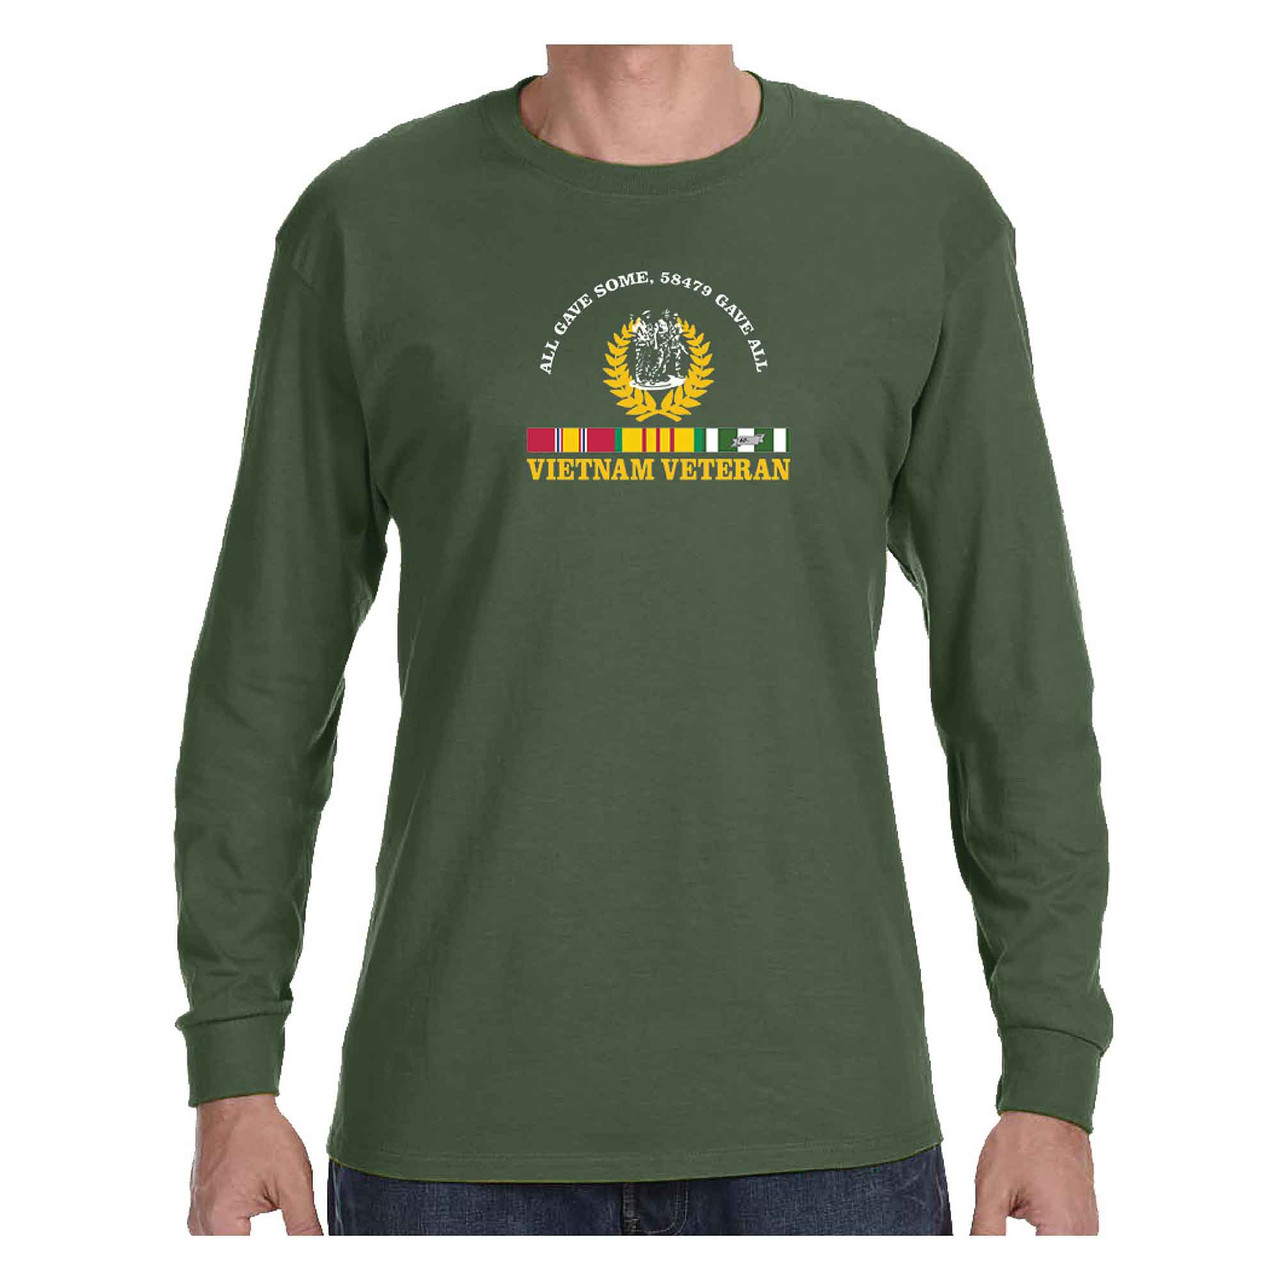 vietnam veteran all gave some 58479 gave all special edition olive drab long sleeve shirt front view